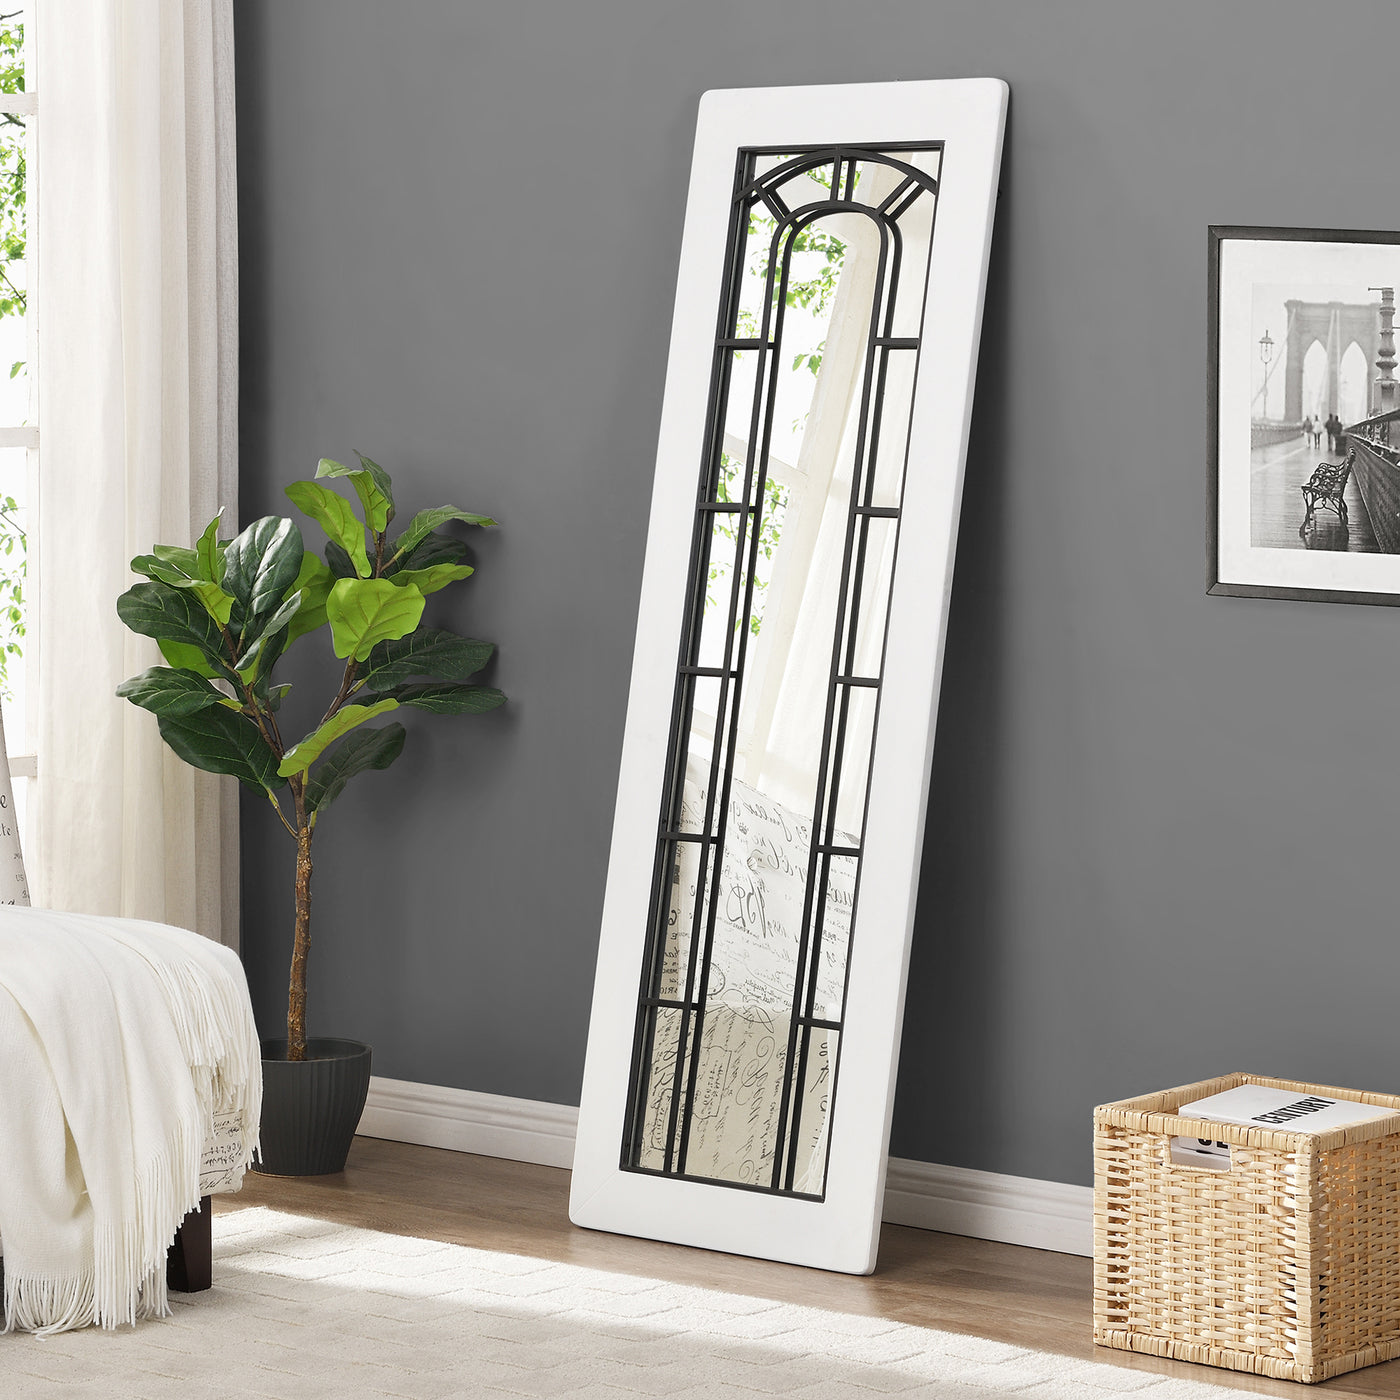 FirsTime & Co. White Brisbane Windowpane Standing Mirror, Farmhouse Style, Made of Wood